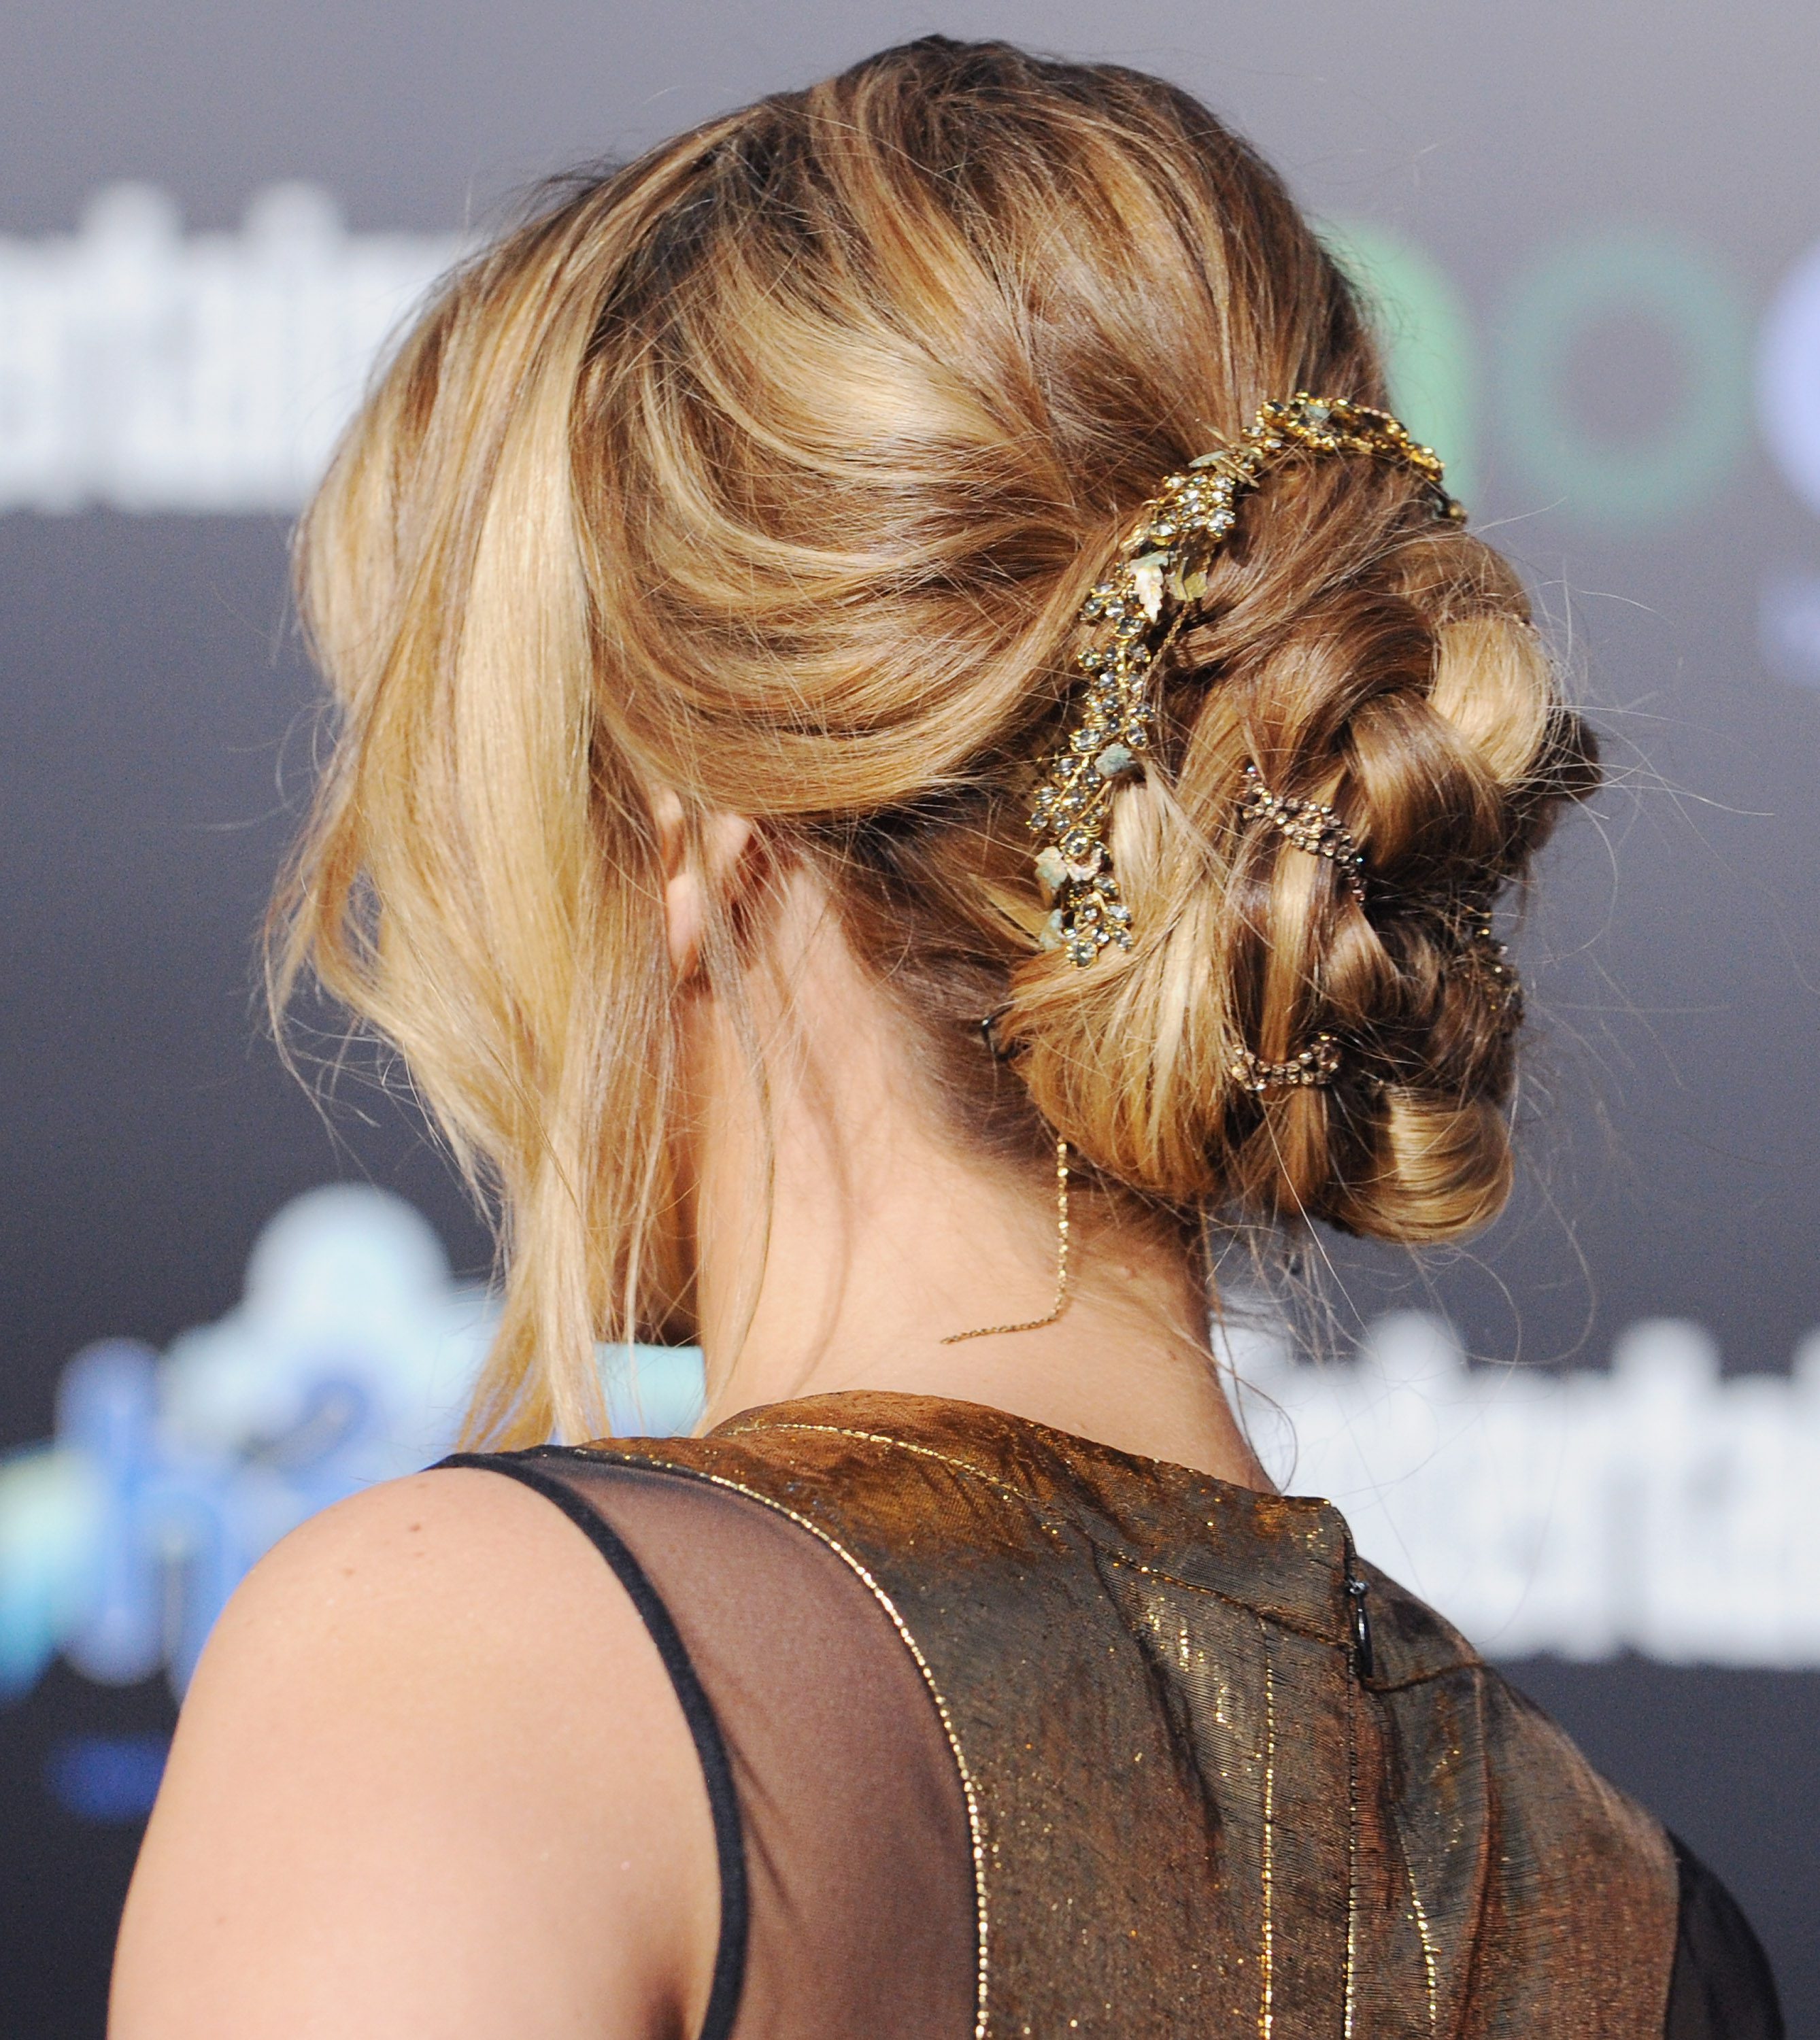 Braided Hairstyles How To Do